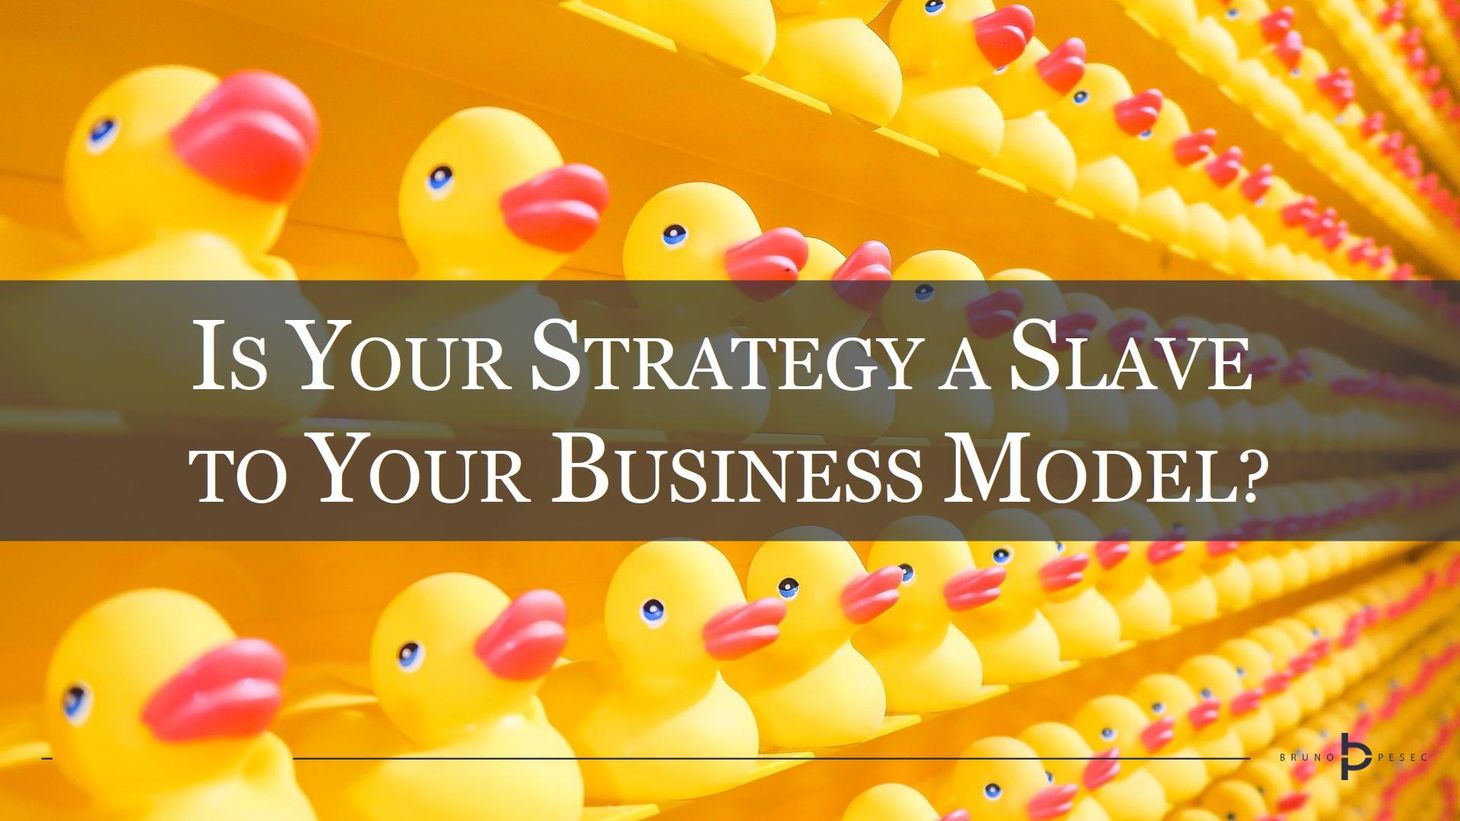 Is your strategy a slave to your business model?